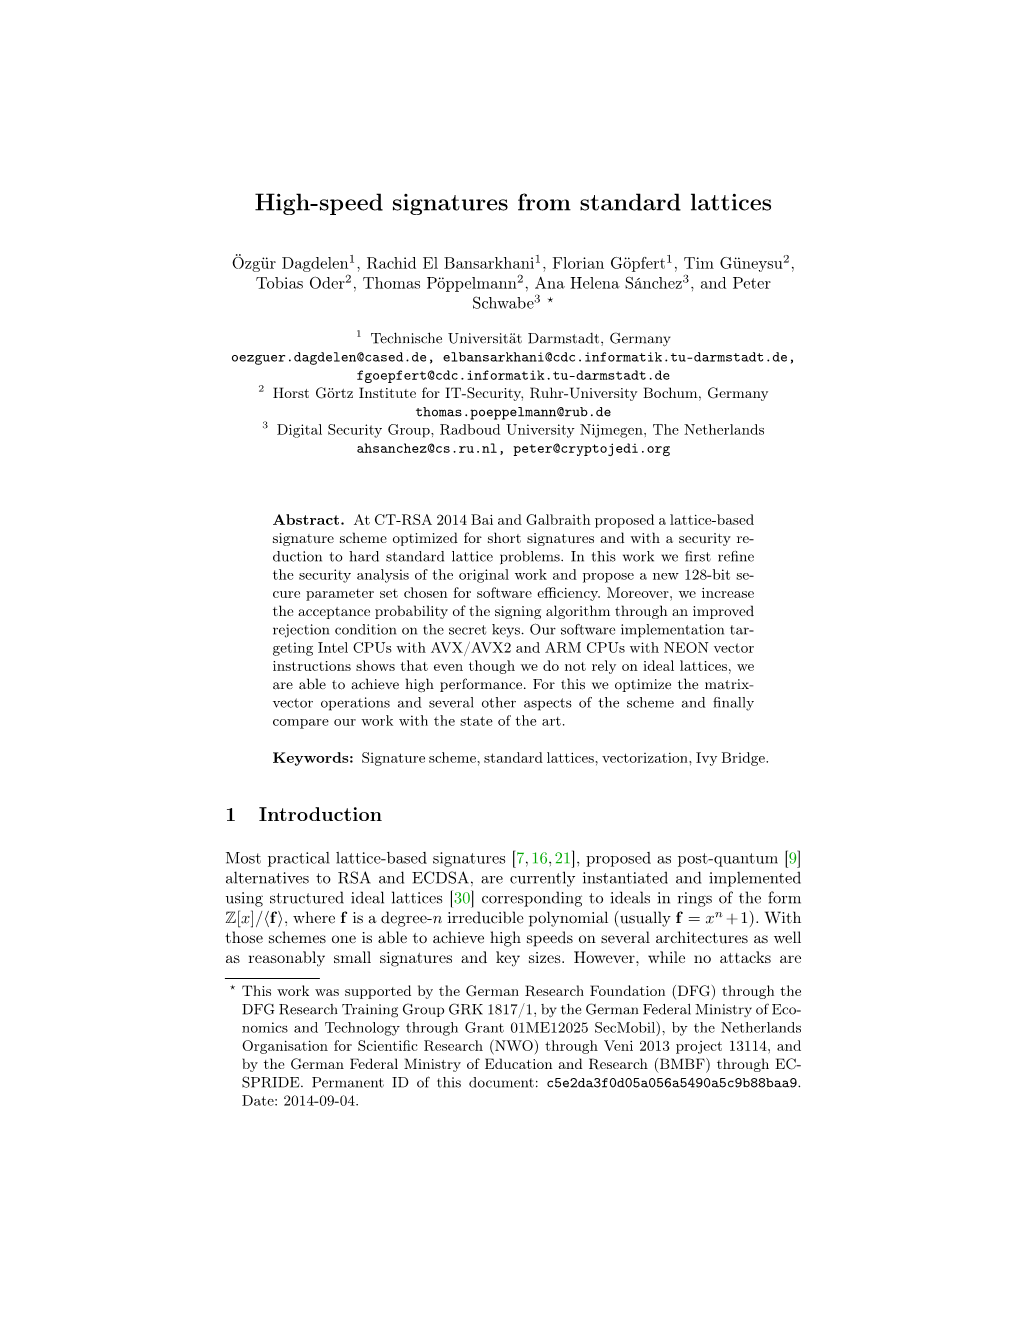 High-Speed Signatures from Standard Lattices